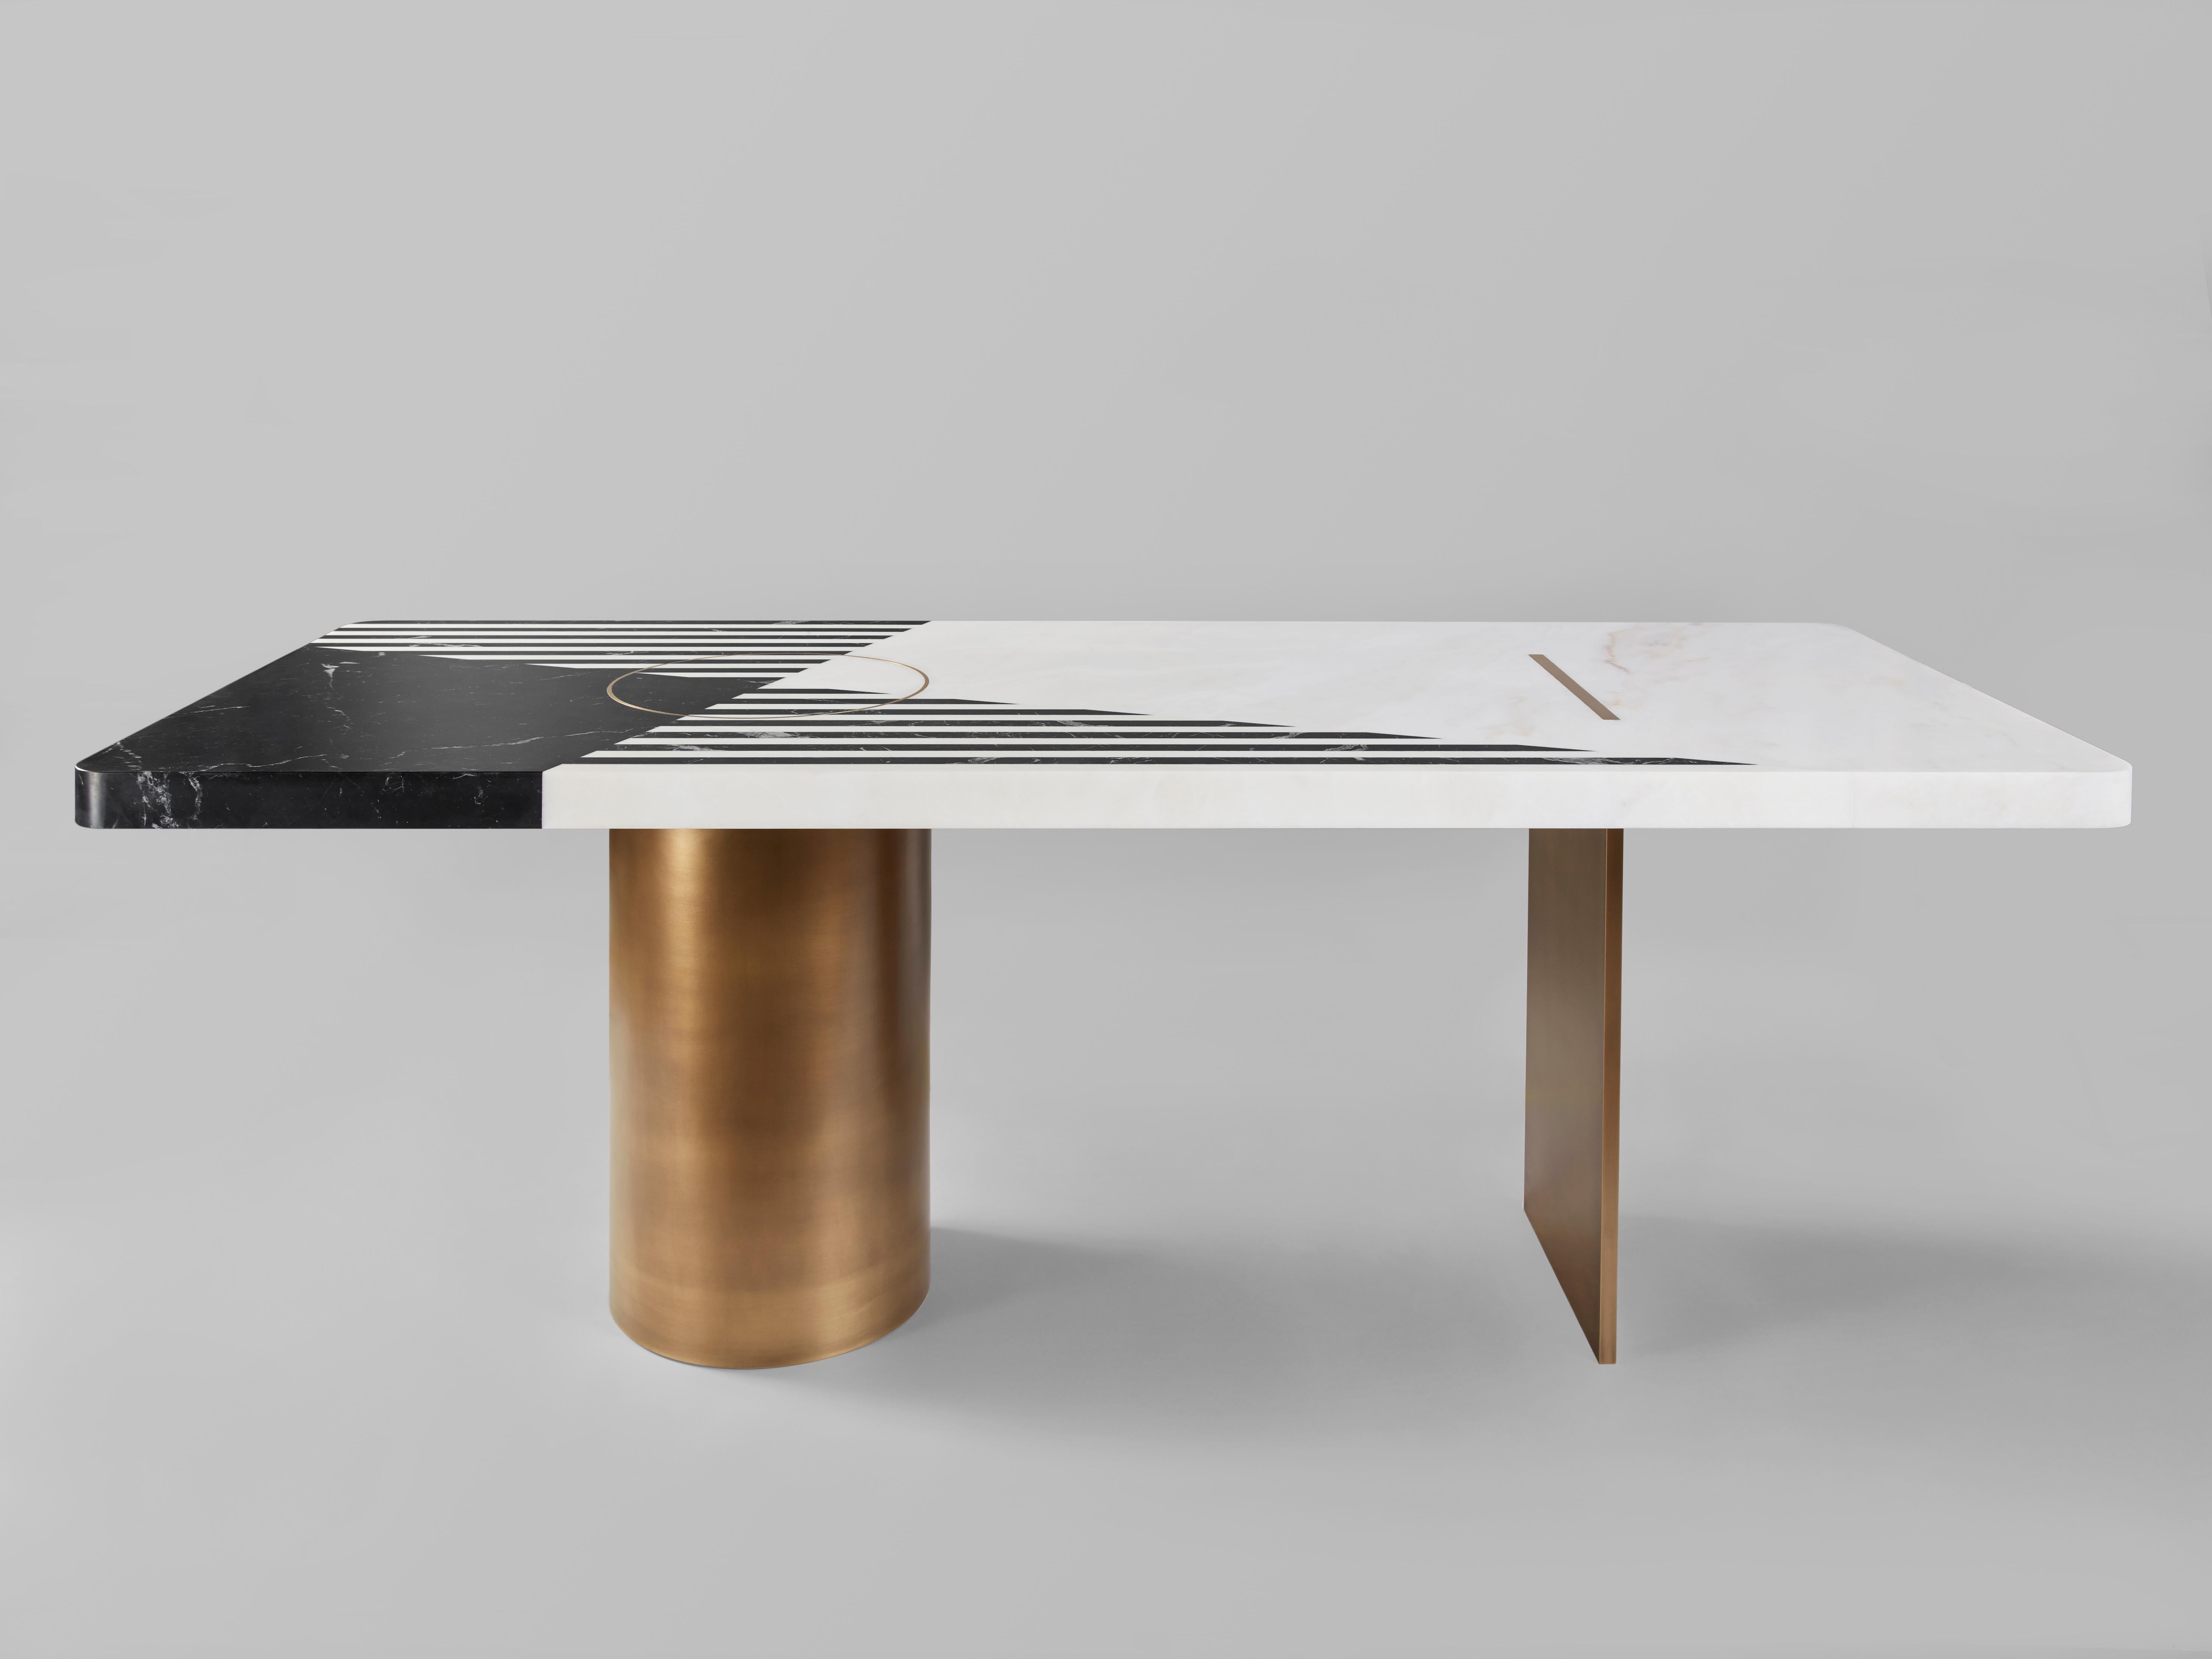 Isabelle Stanislas’ 'Ellipse' dining table incarnates the designer’s ‘artistic philosophy of structure’, in other words her desire to create a design that aims at a form of quintessence. This graphic table is based on the masterful conjugation of